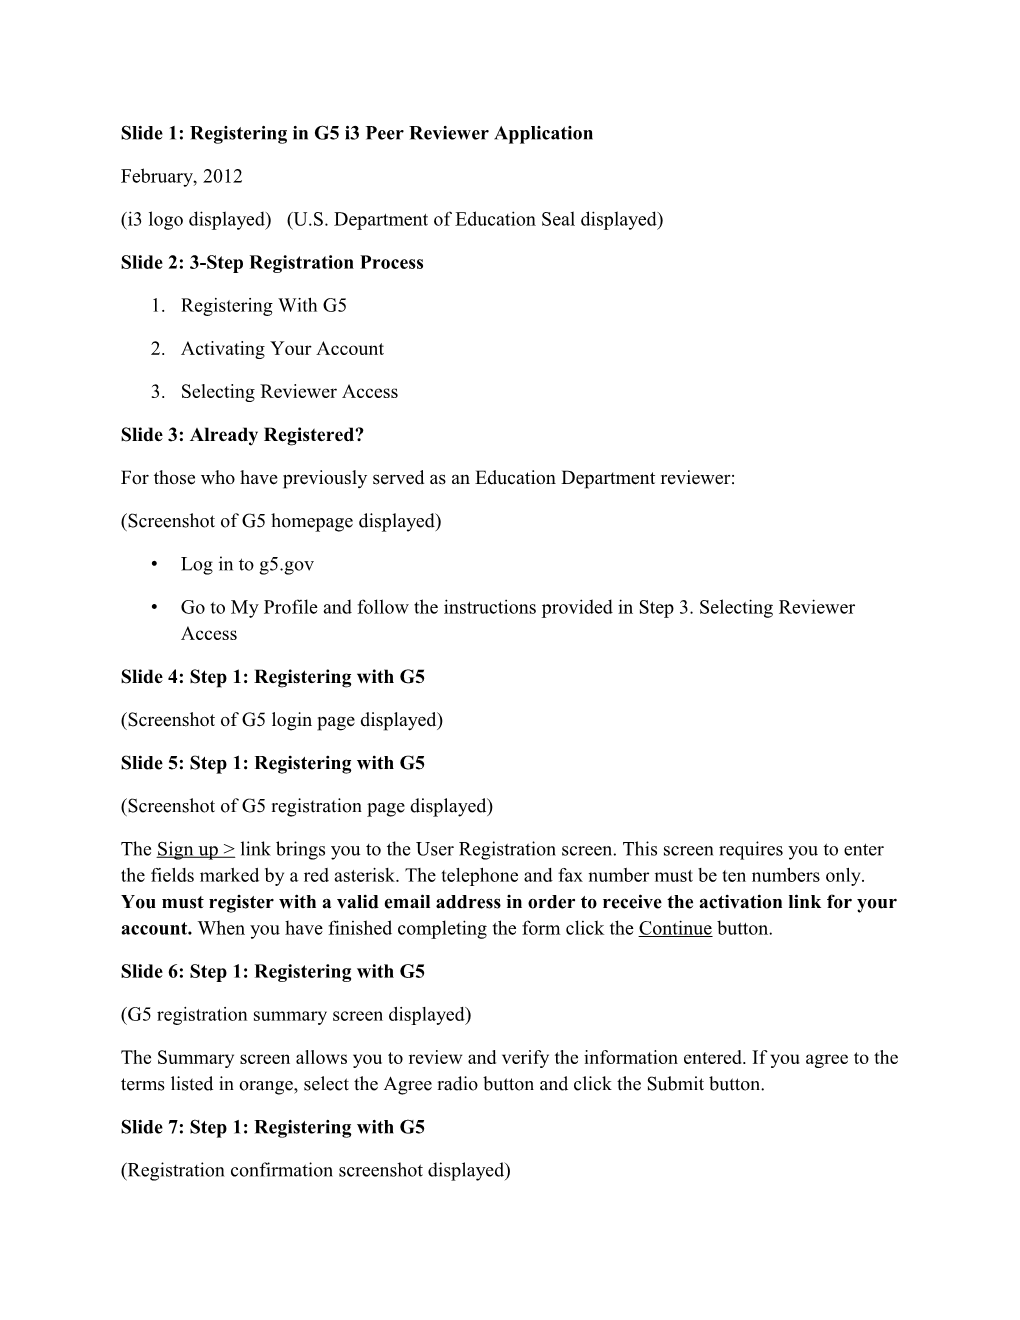 U.S. Department of Education G5 Reviewer Registration Steps Summary Document (MS Word)